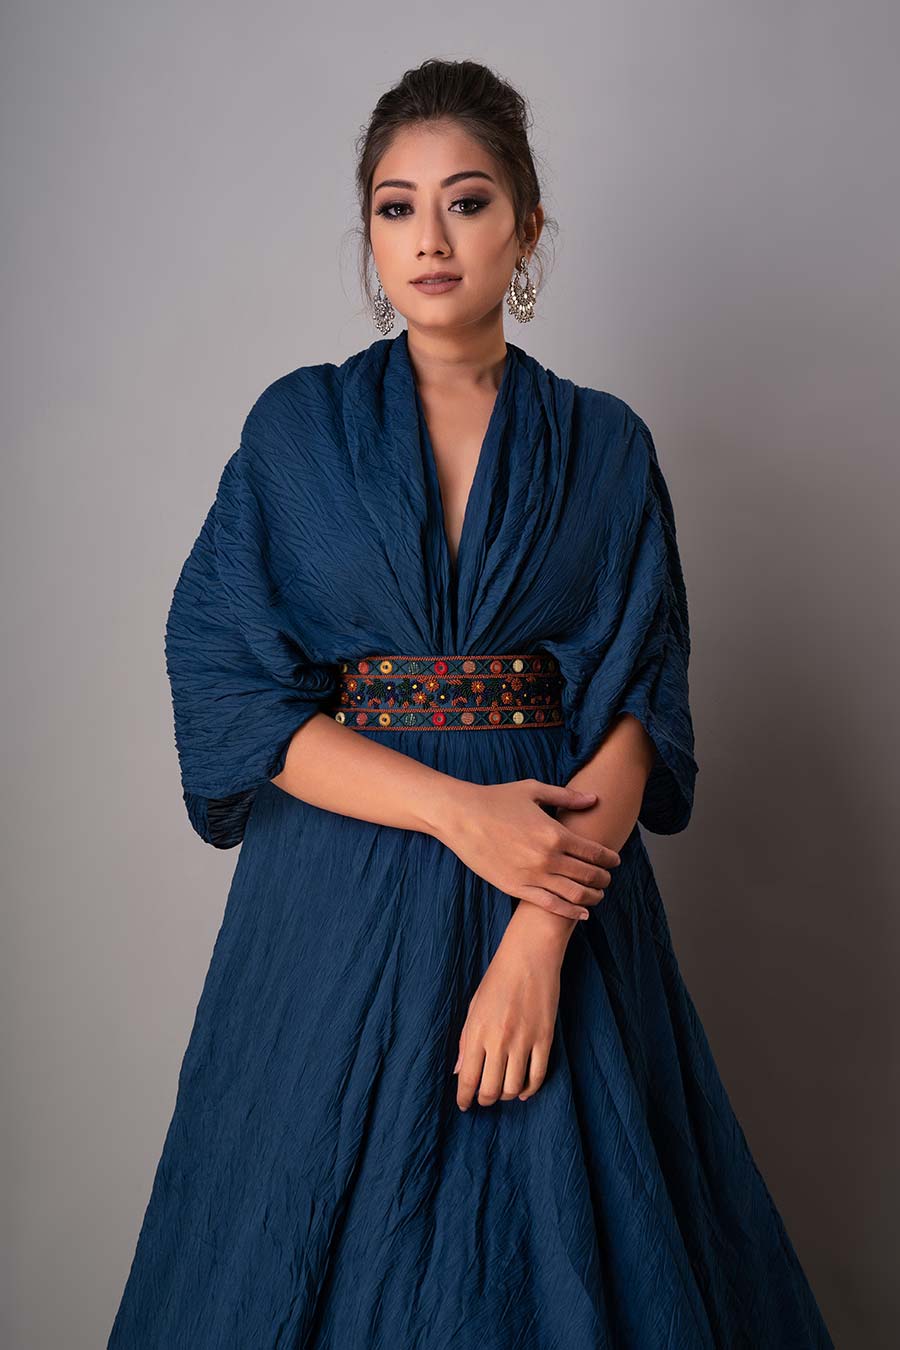 Blue Draped Gown With Embroidered Belt